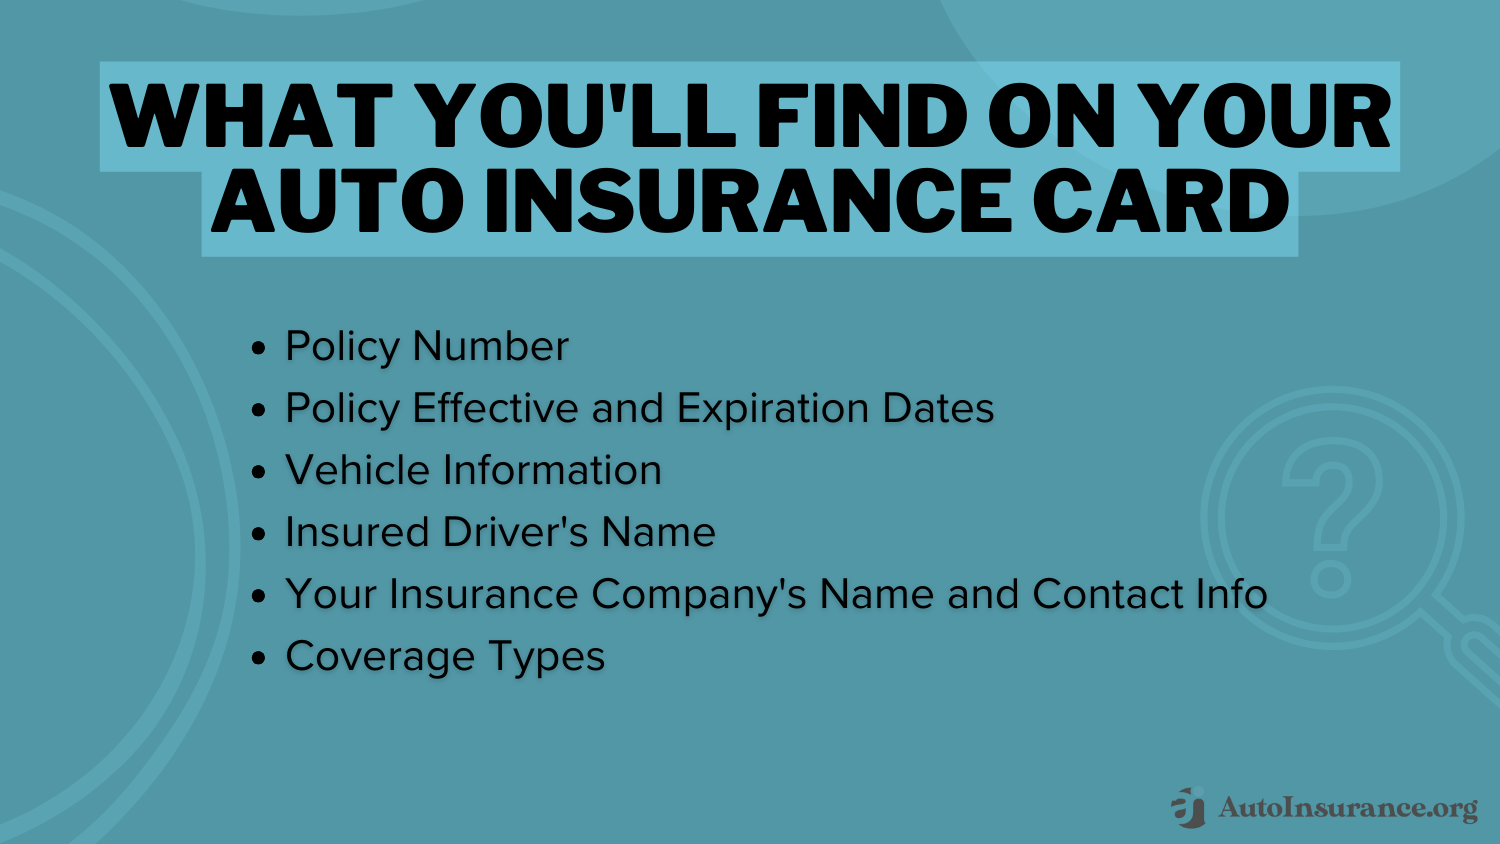 What You'll Find on Your Auto Insurance Card: Do you need auto insurance to get a license plate?